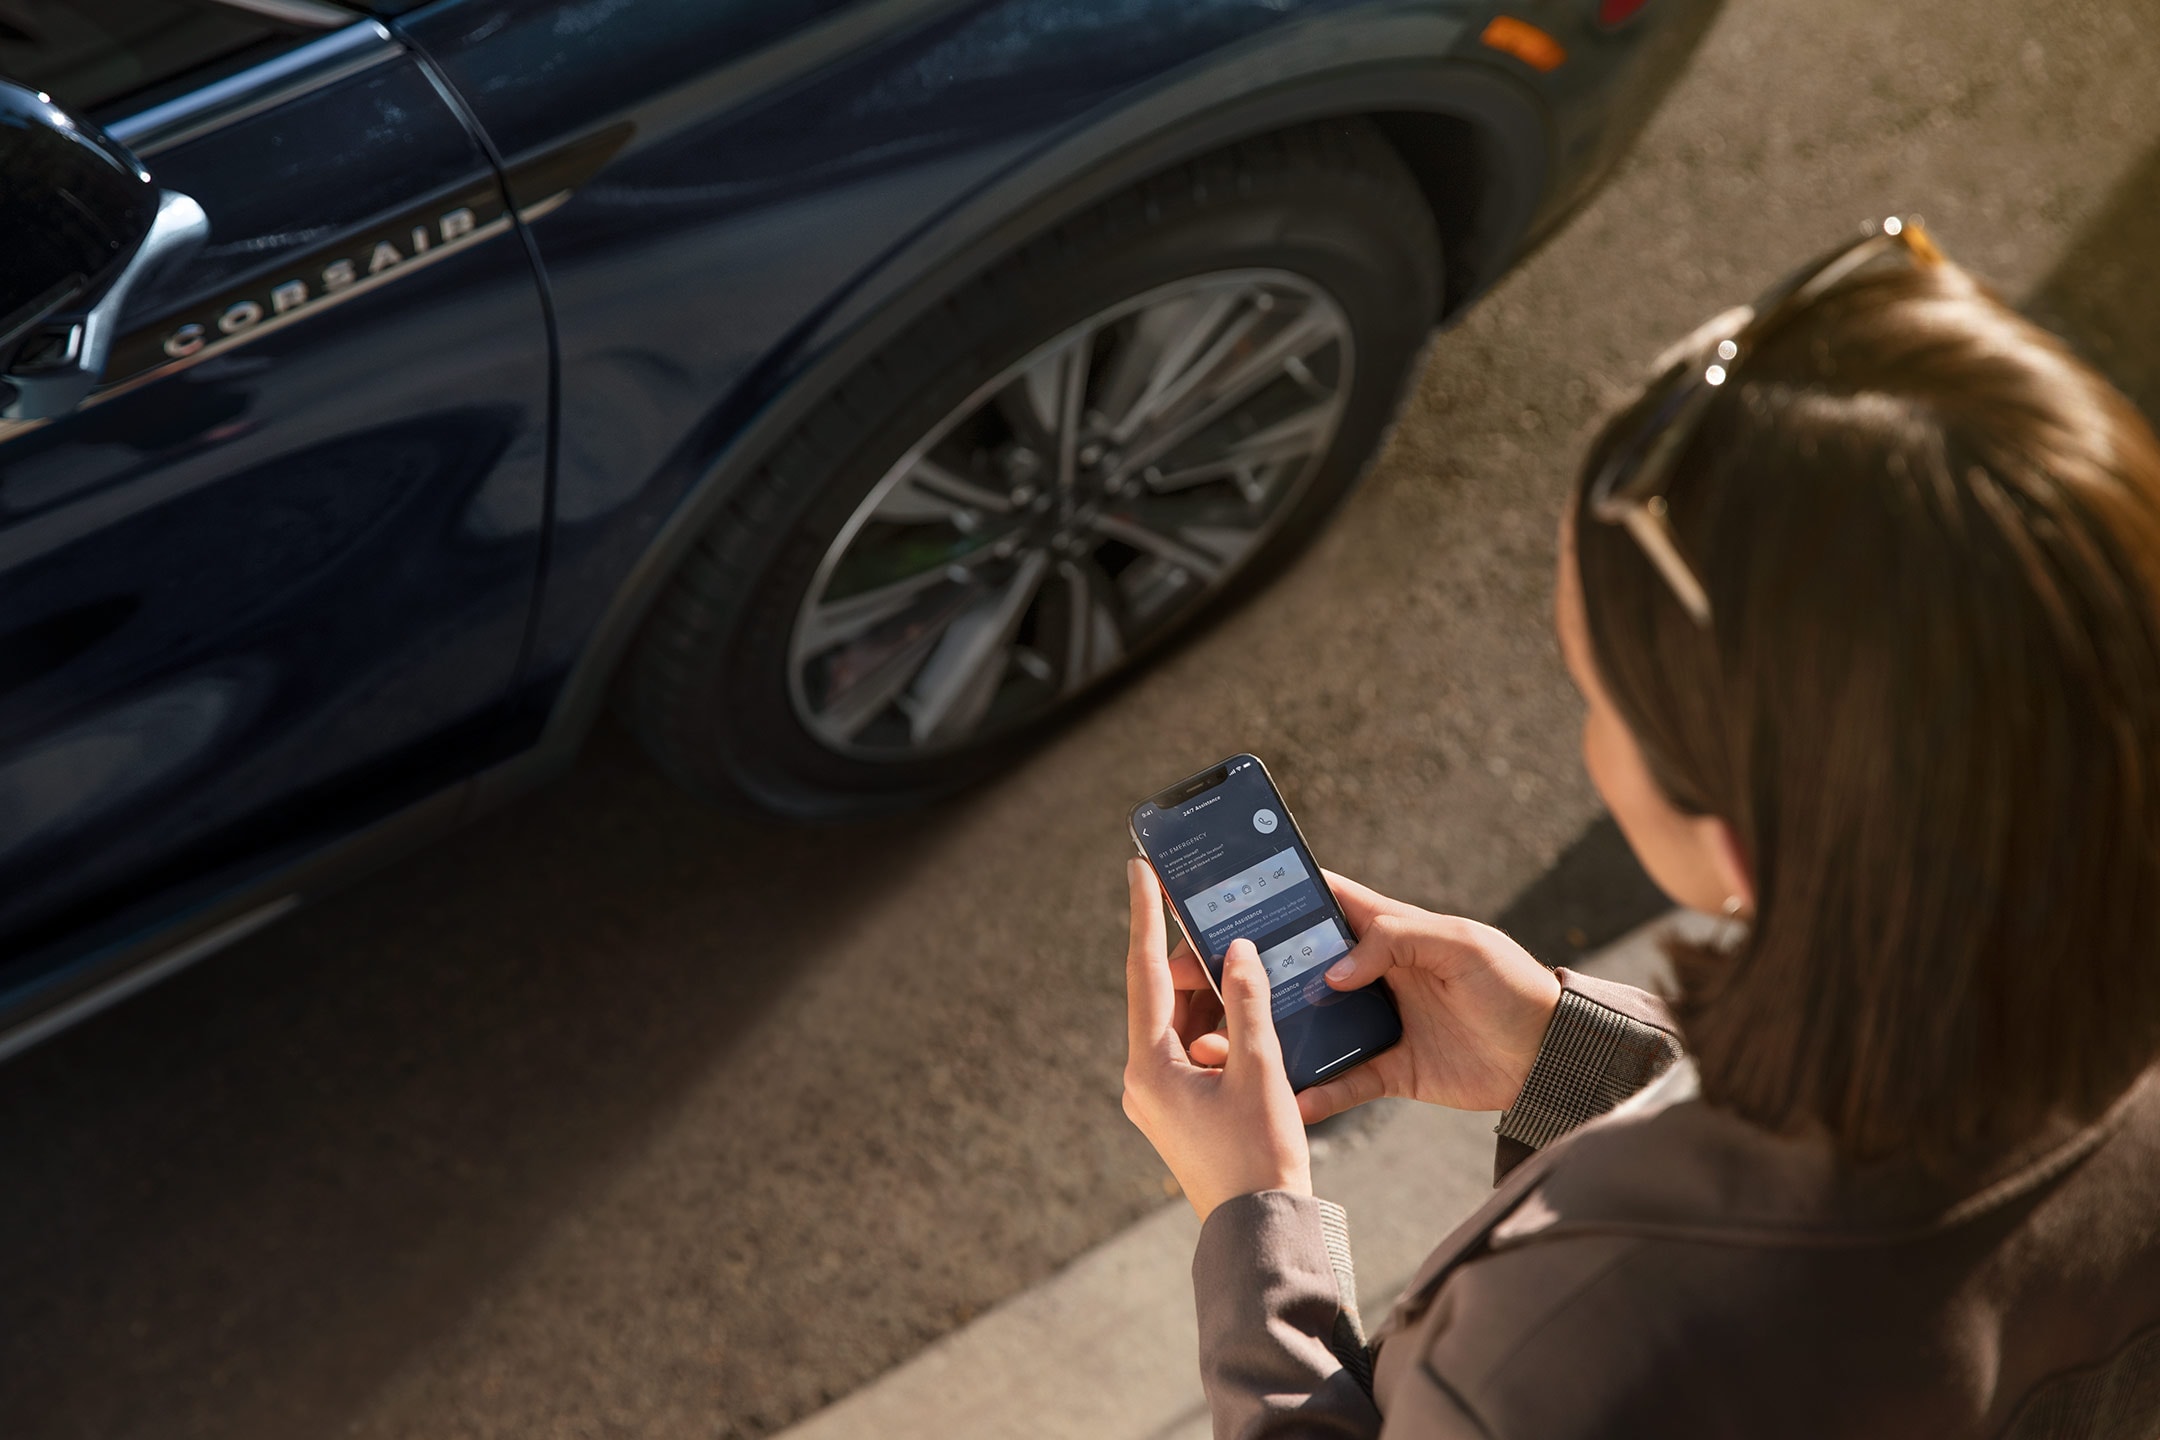 A person is interacting with the Lincoln Way® App on their smartphone as she approaches her Lincoln vehicle.